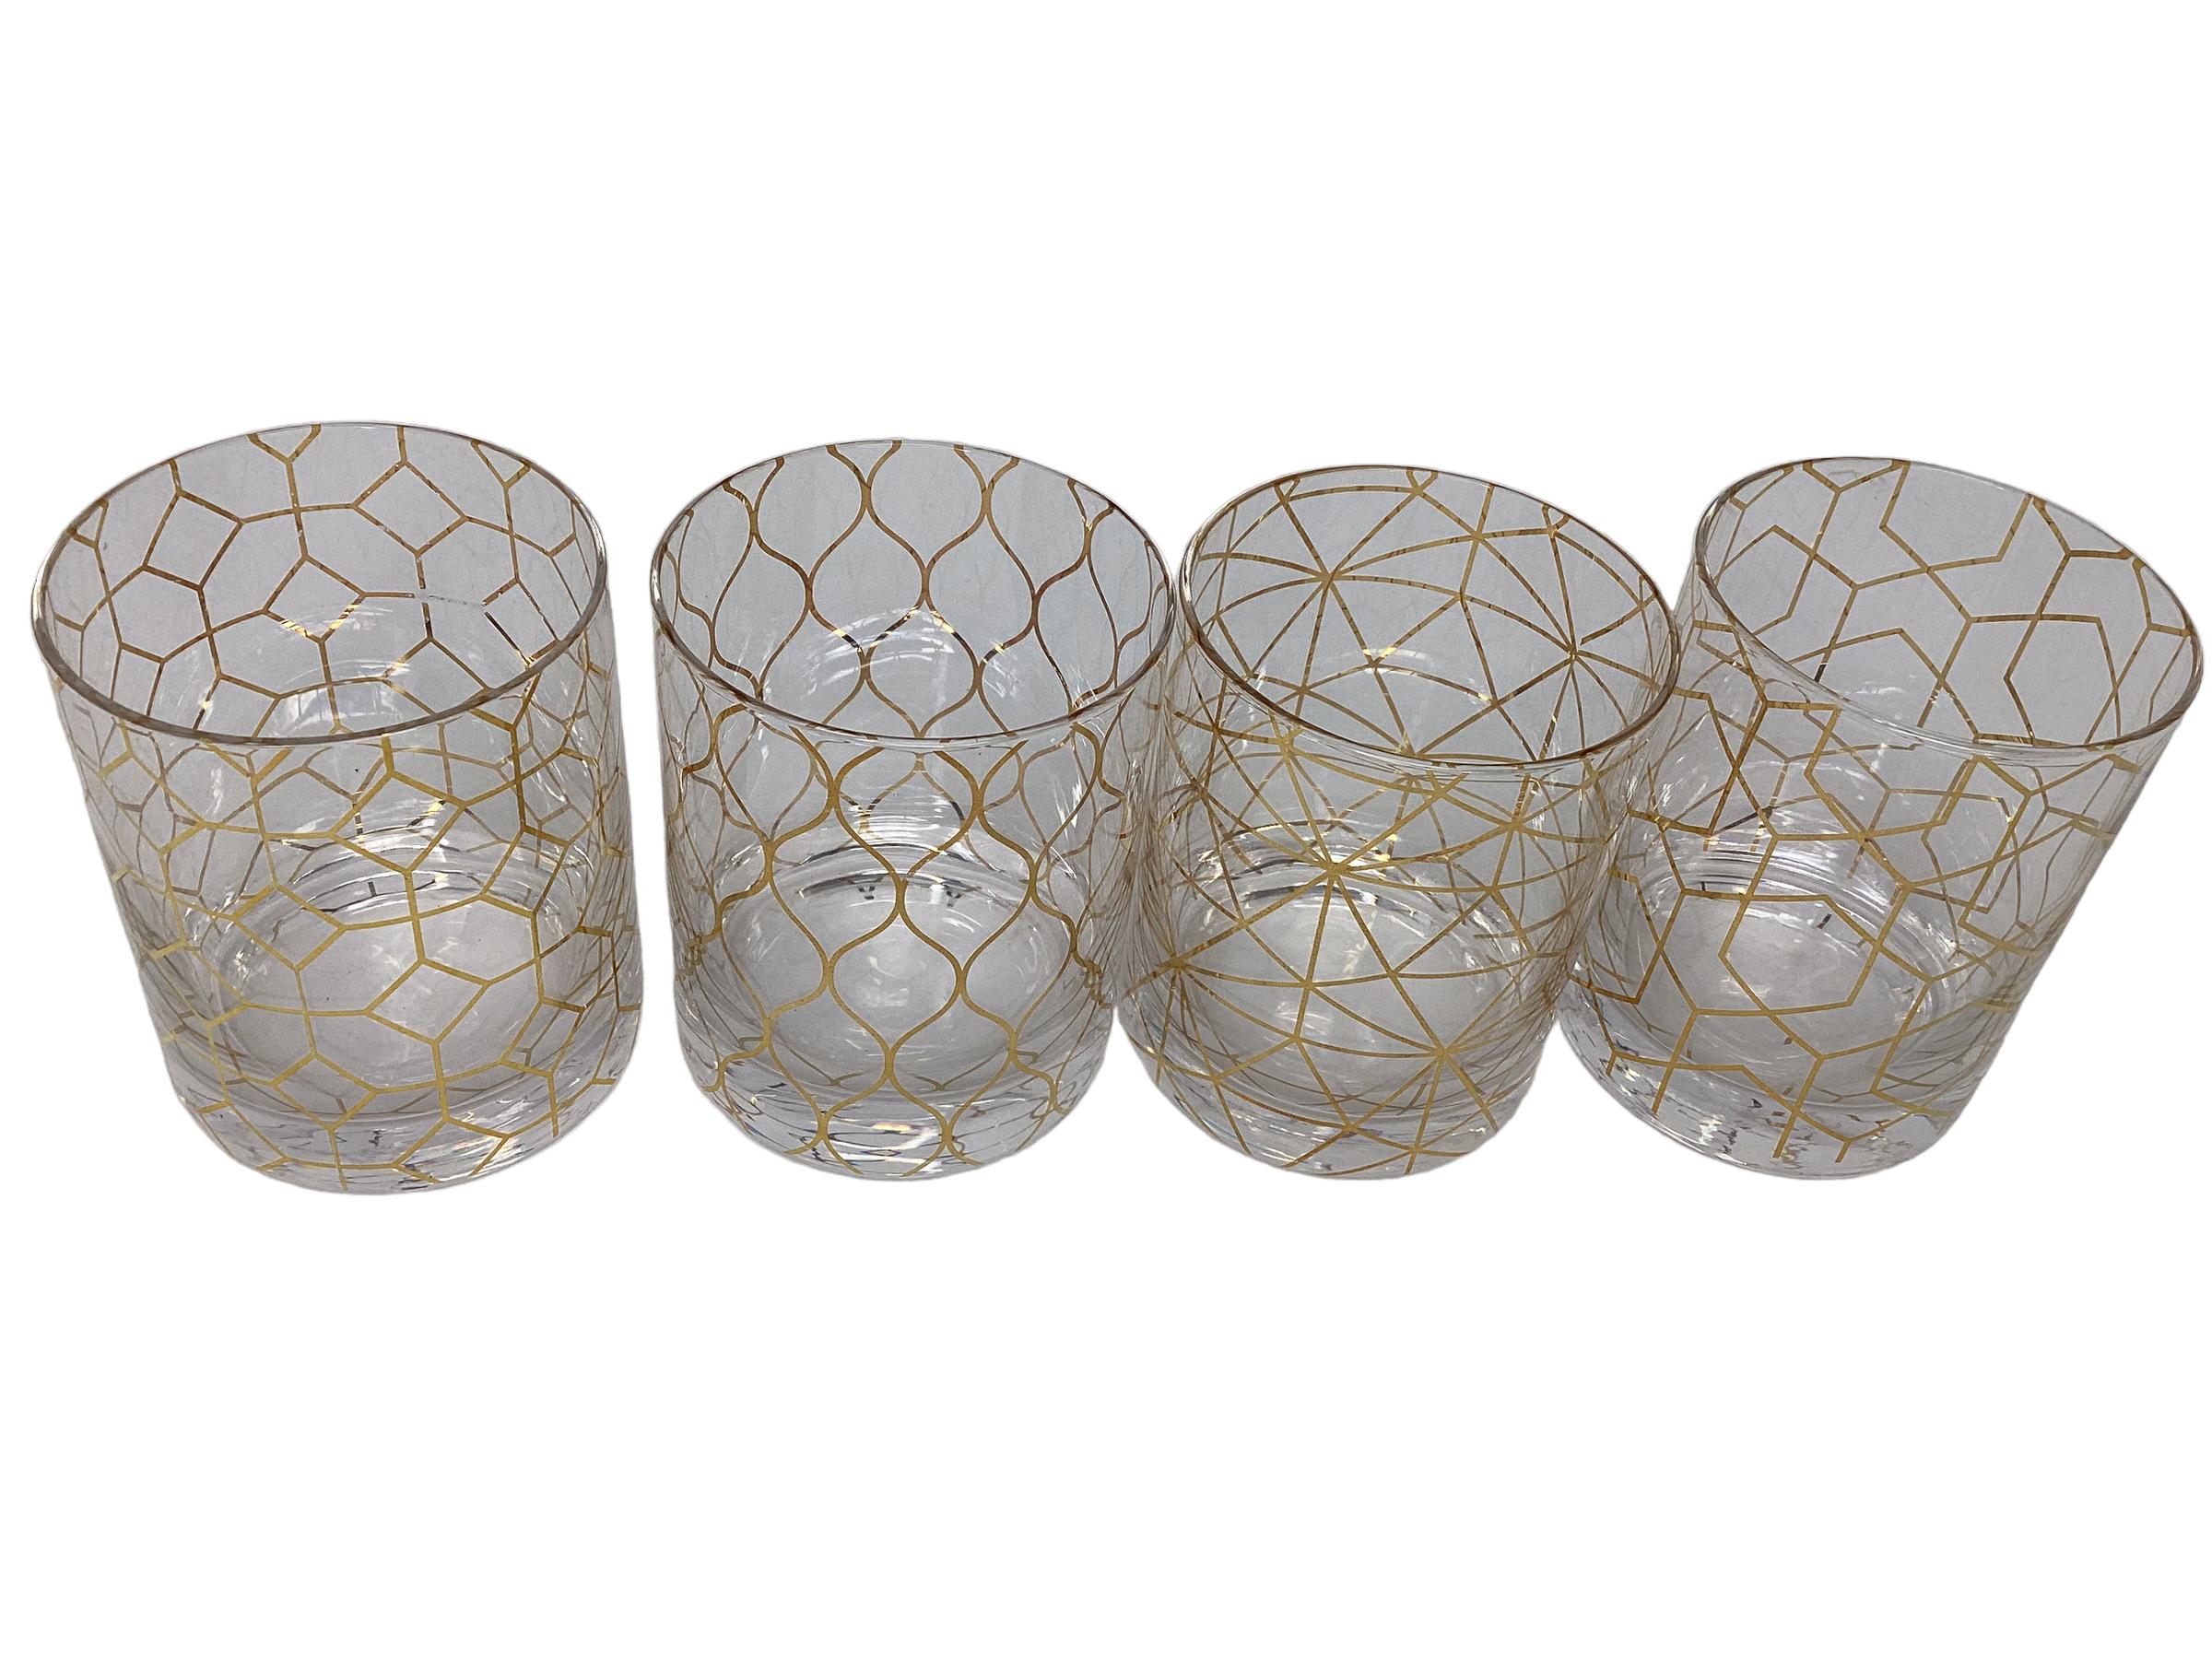 Set of Four Rocks Glasses with Geometric Shapes  In Good Condition For Sale In Chapel Hill, NC